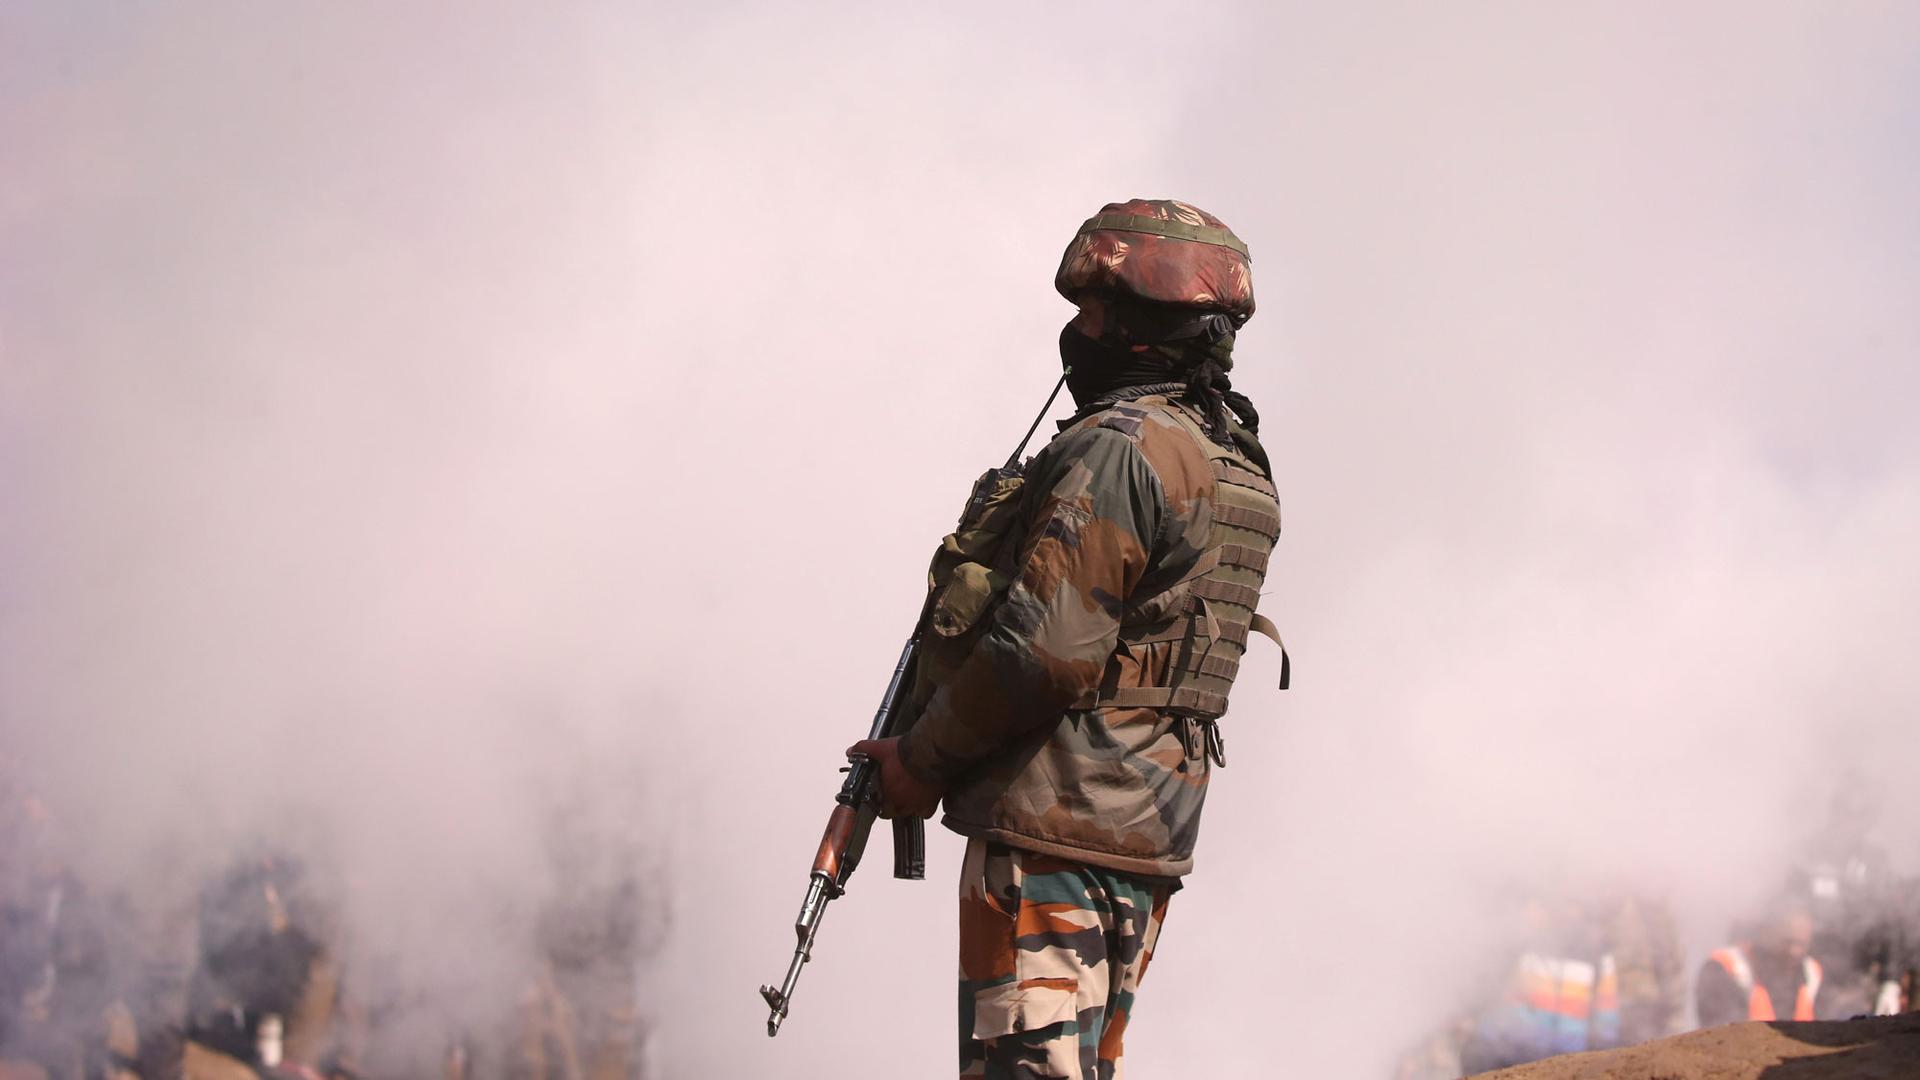 An Indian soldier stands guard while carrying a riffle with a lot of white smoke billowing behind him.